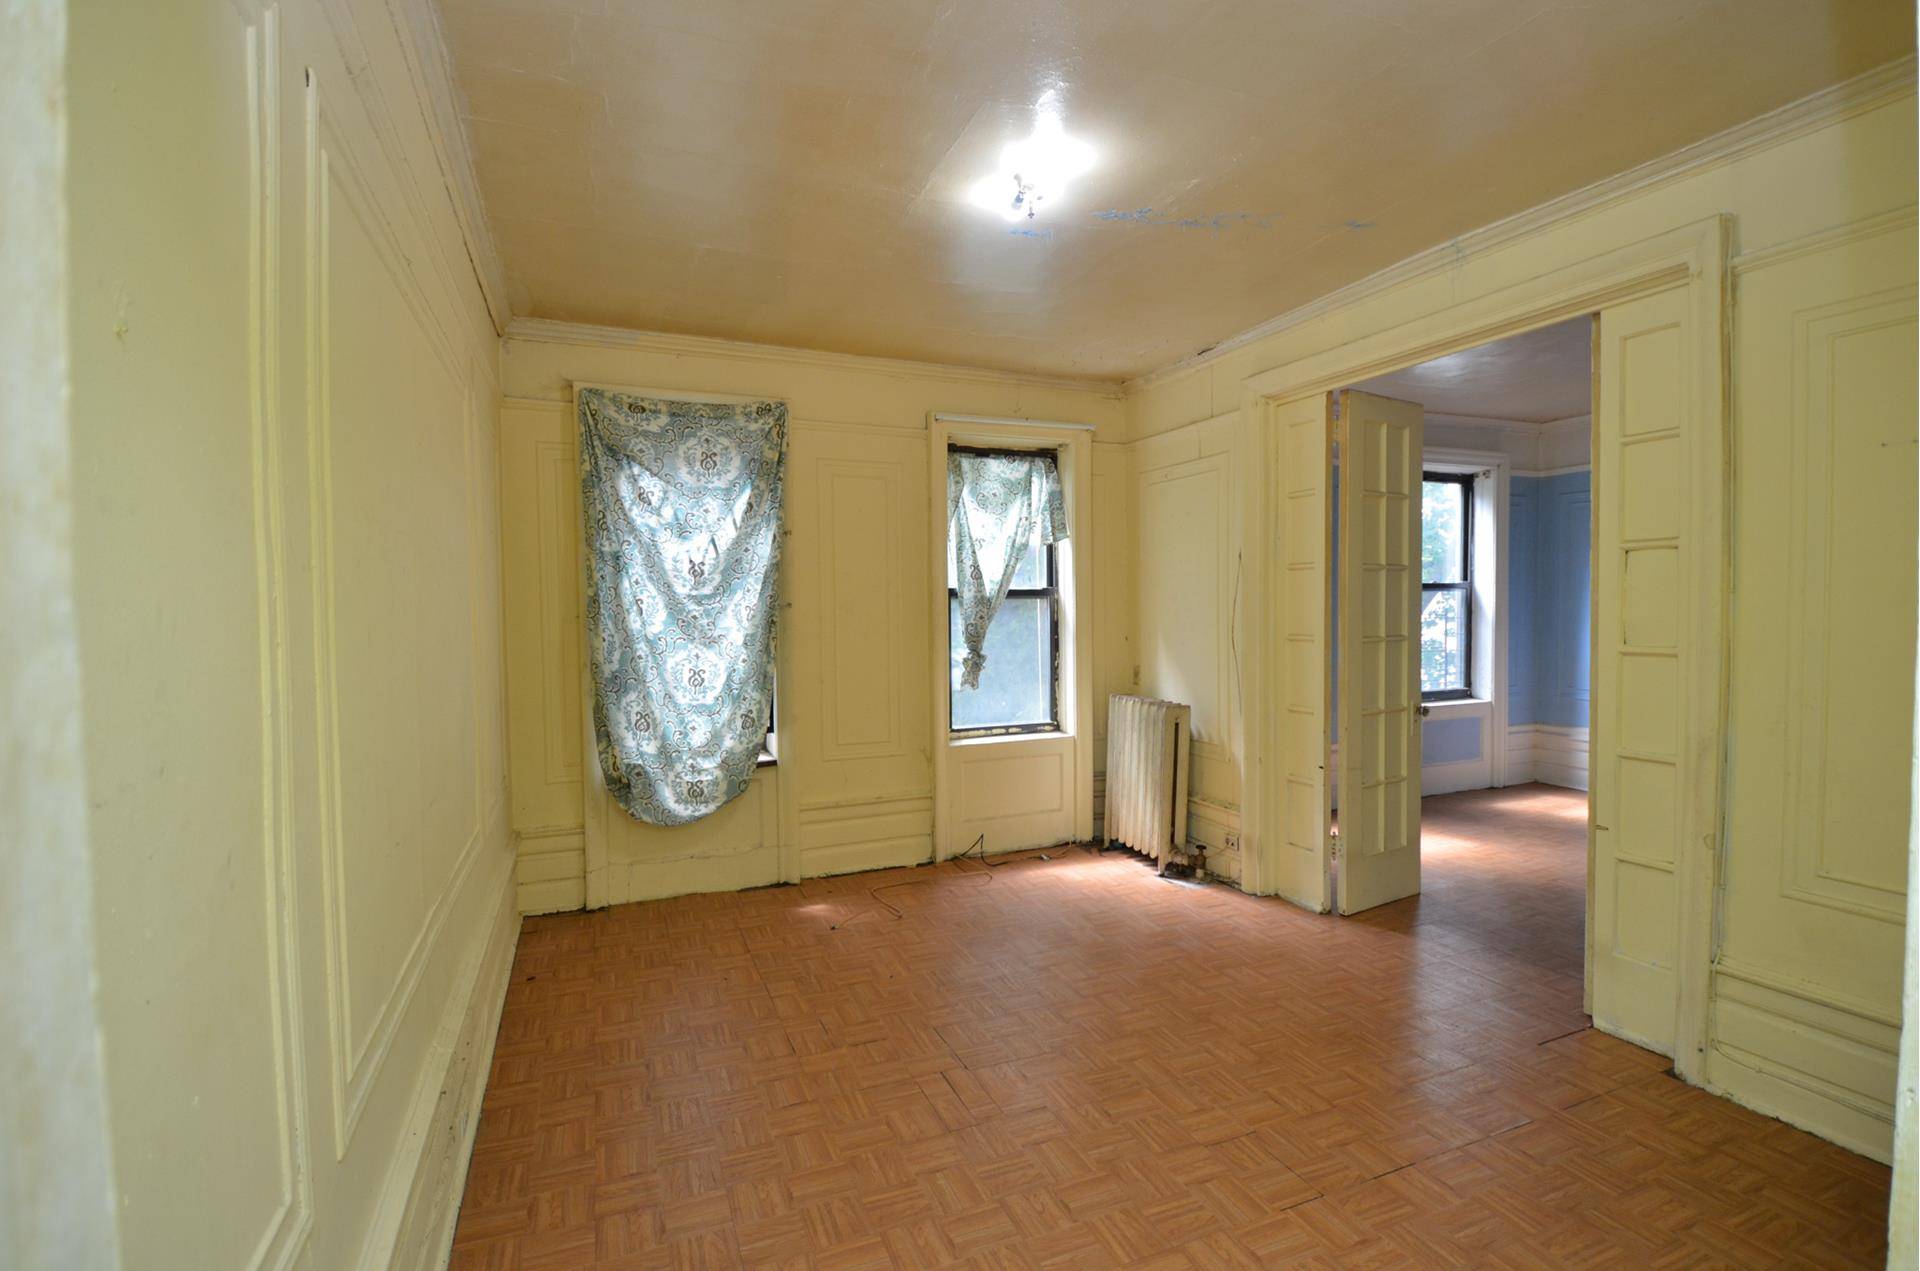 Situated in the landmark of the Clinton Hill historic district, this 2nd floor walk up fixer upper opportunity on tree lined Cambridge Place is configured as 2 bedrooms, a windowed ...